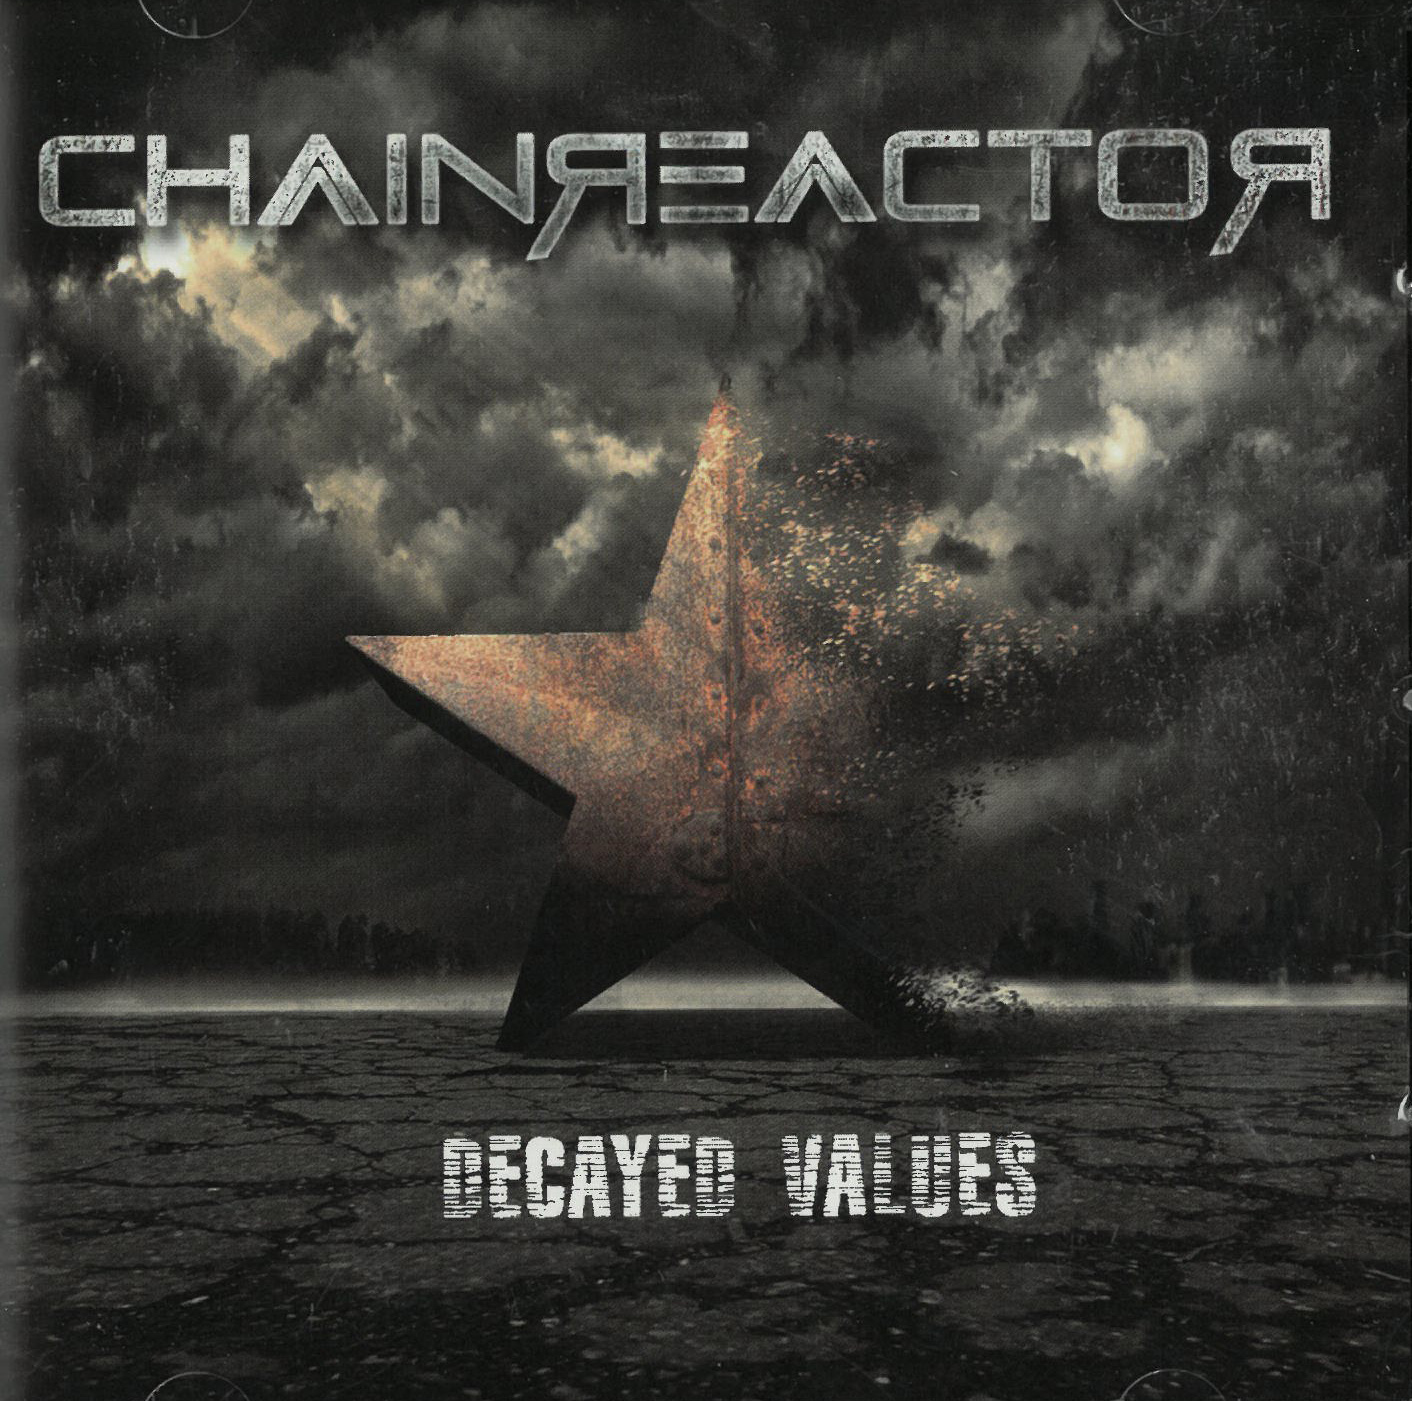 Chainreactor Decayed Values CD 602112